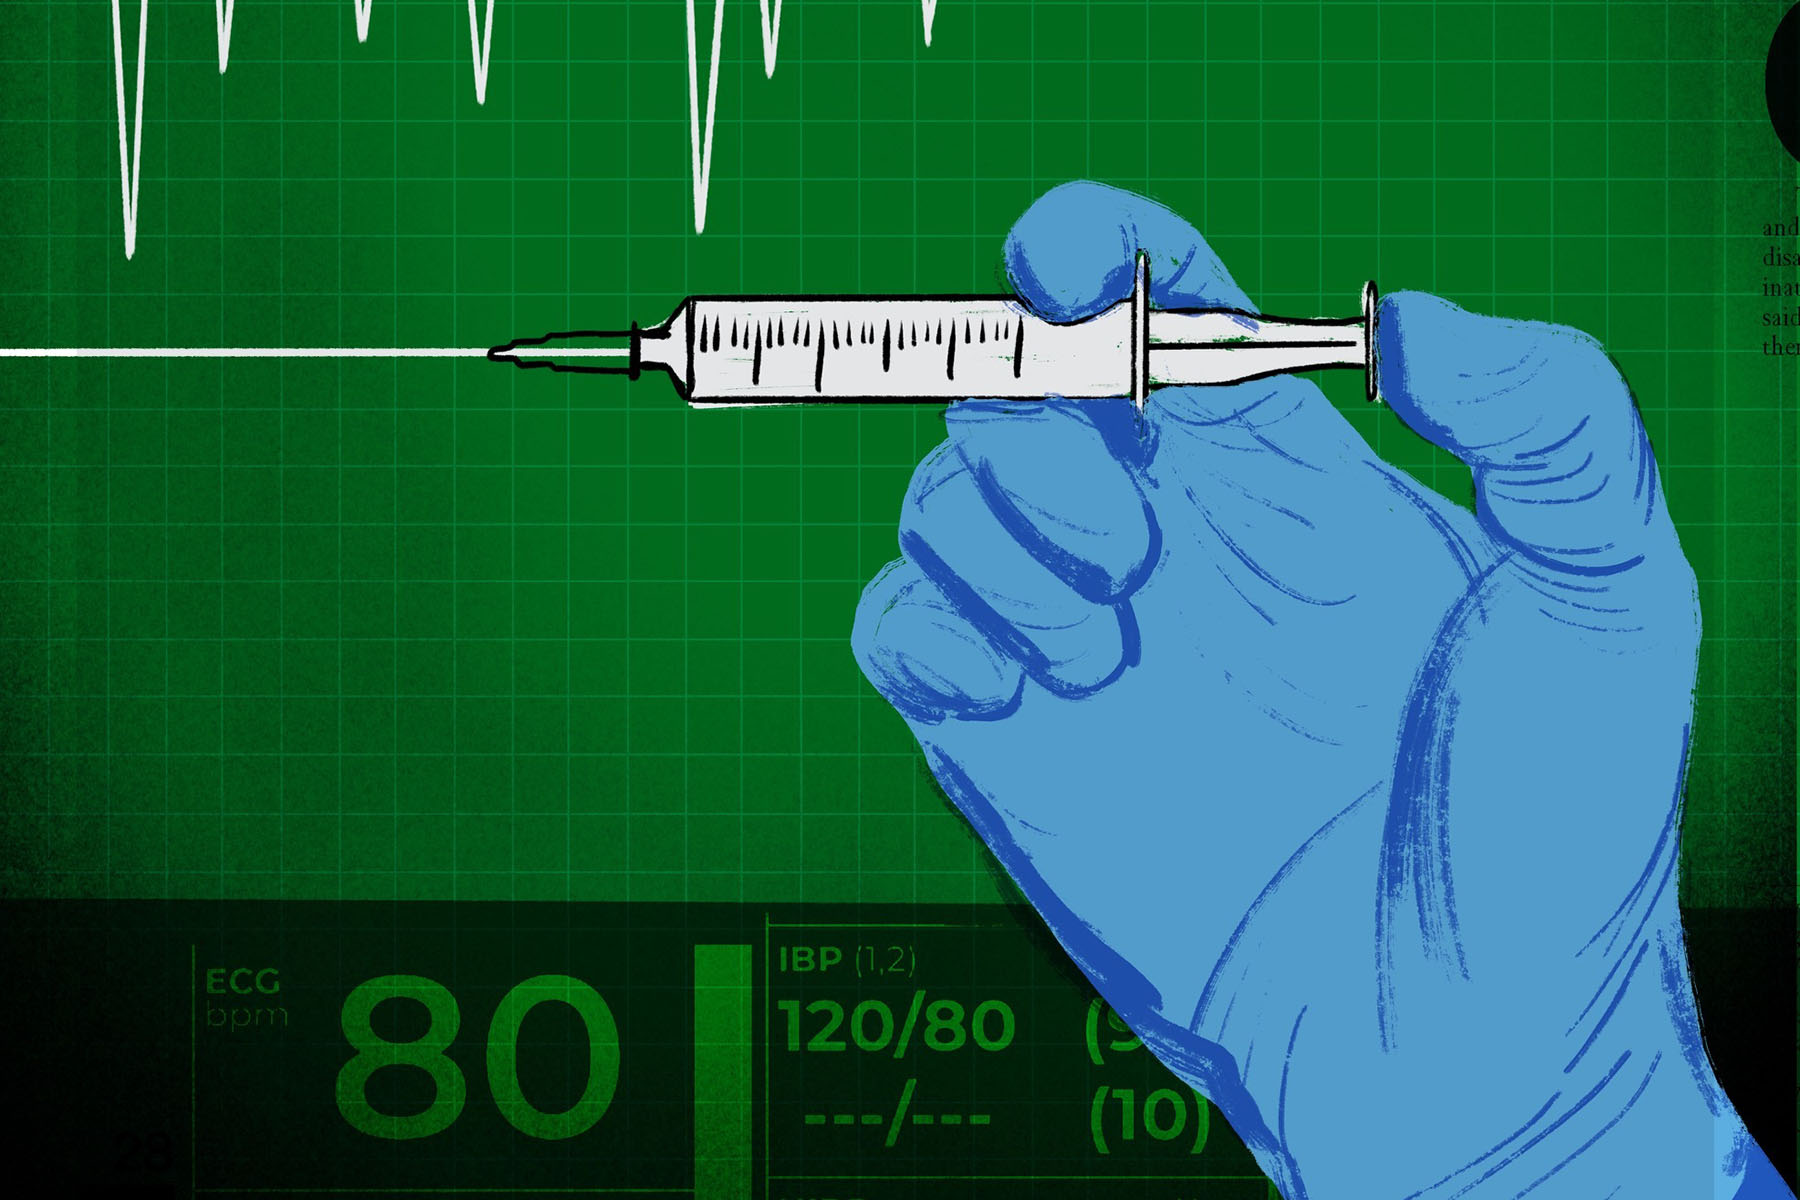 Illustration of a gloved hand holding a syringe over a green background.